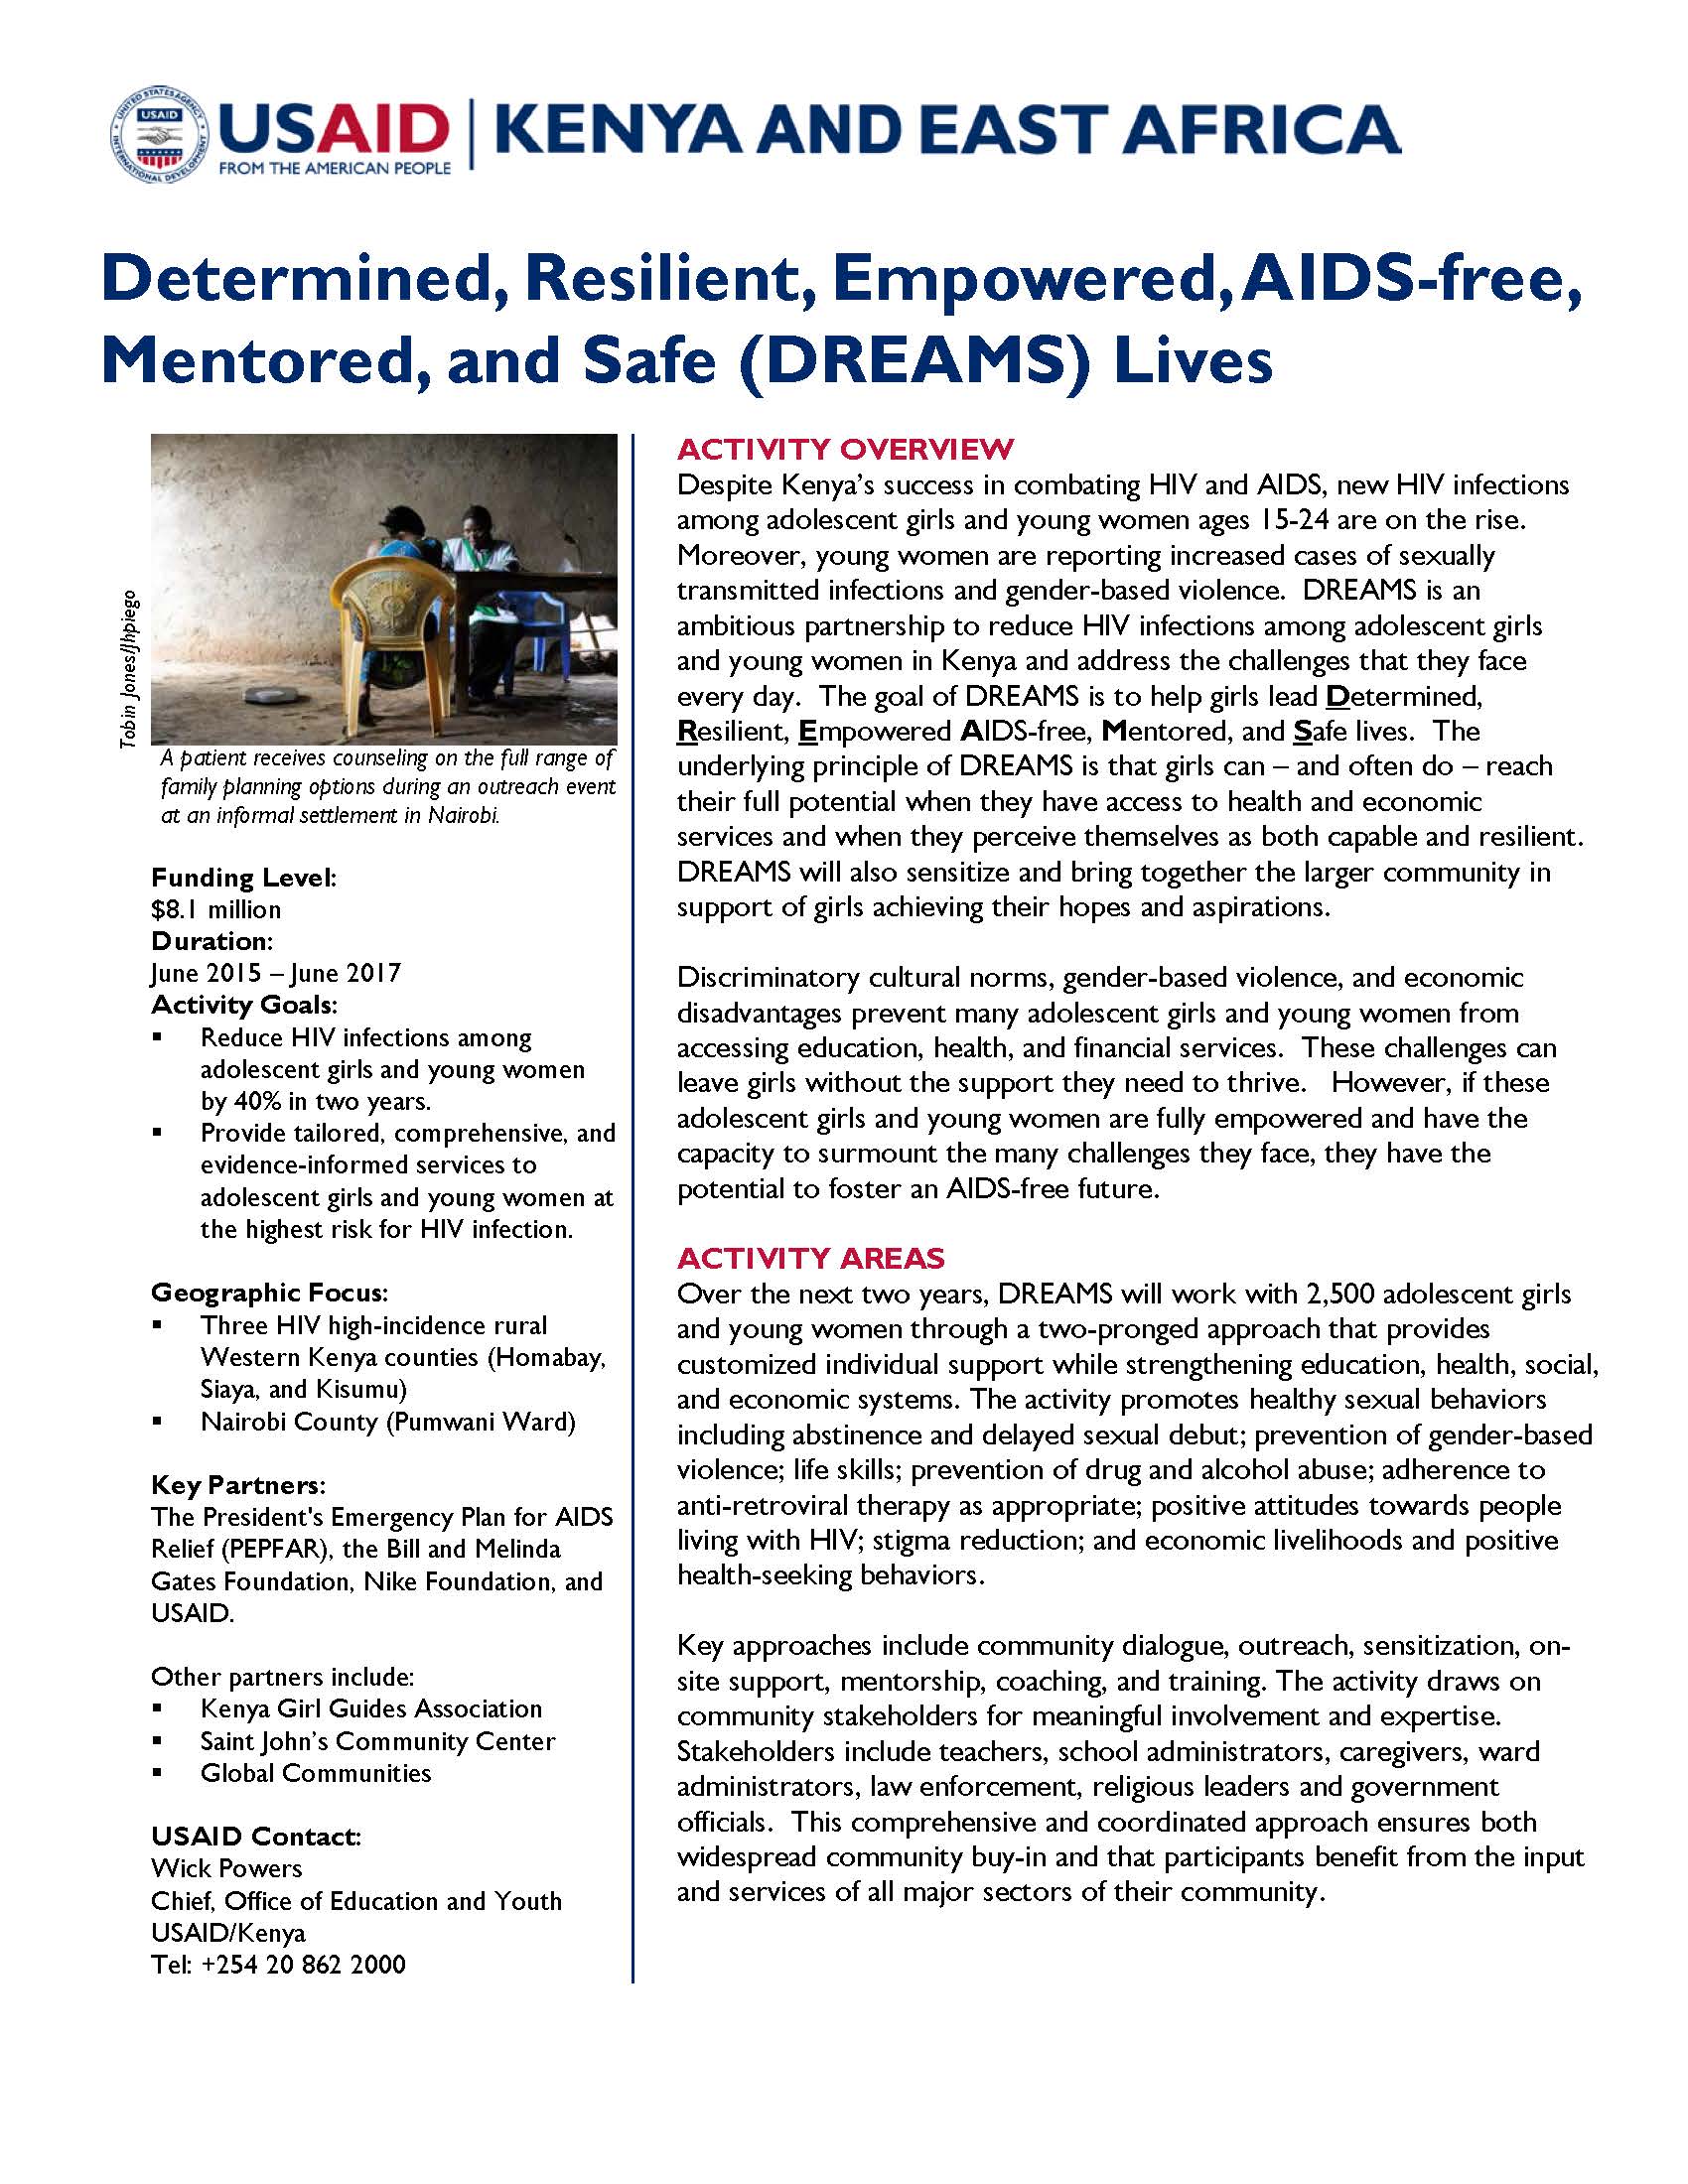 Determined, Resilient, Empowered, AIDS-free, Mentored and Safe (DREAMS) 